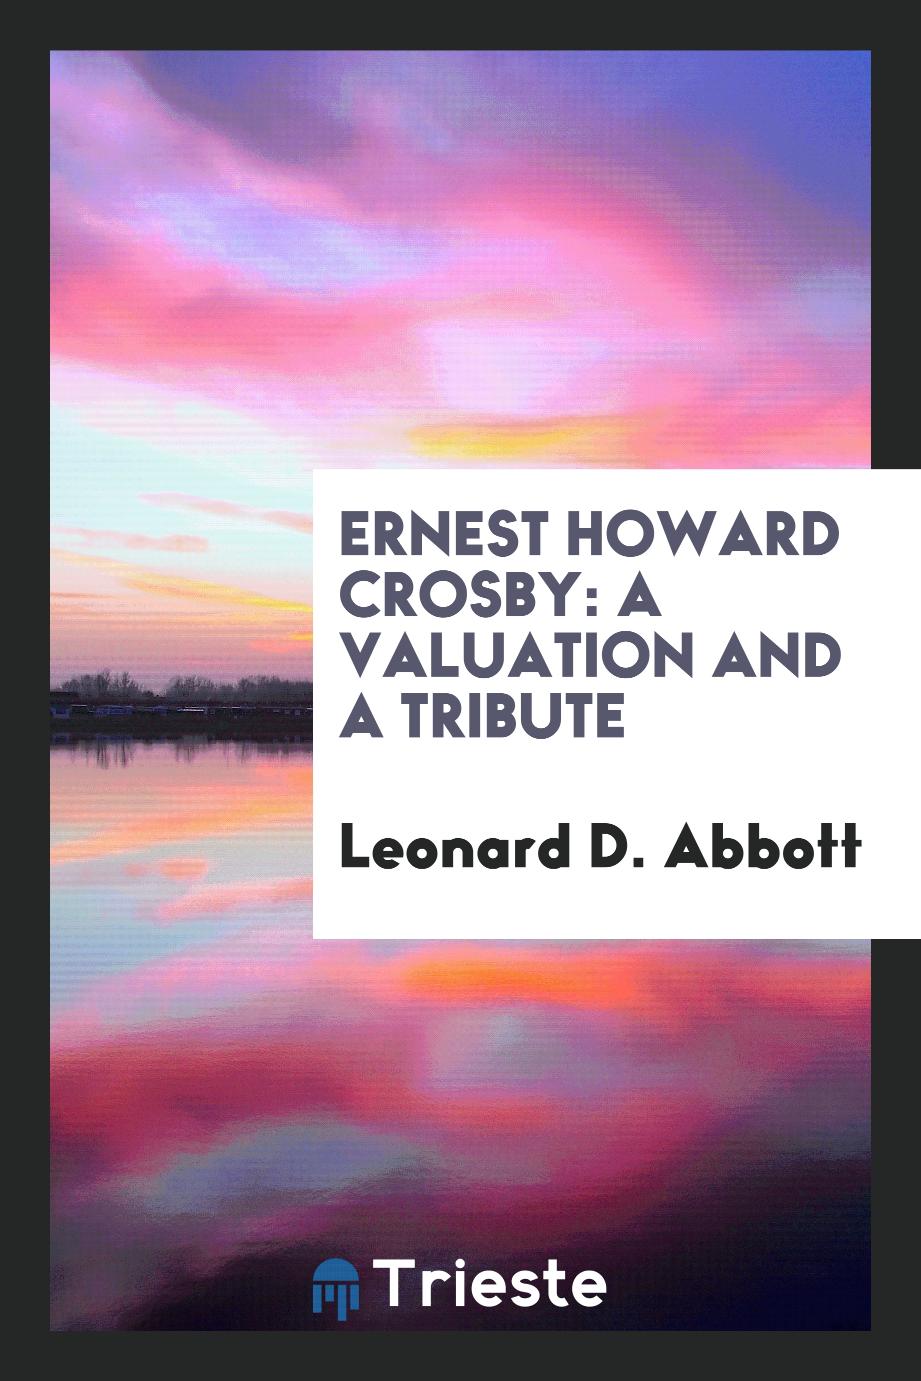 Ernest Howard Crosby: A Valuation and a Tribute